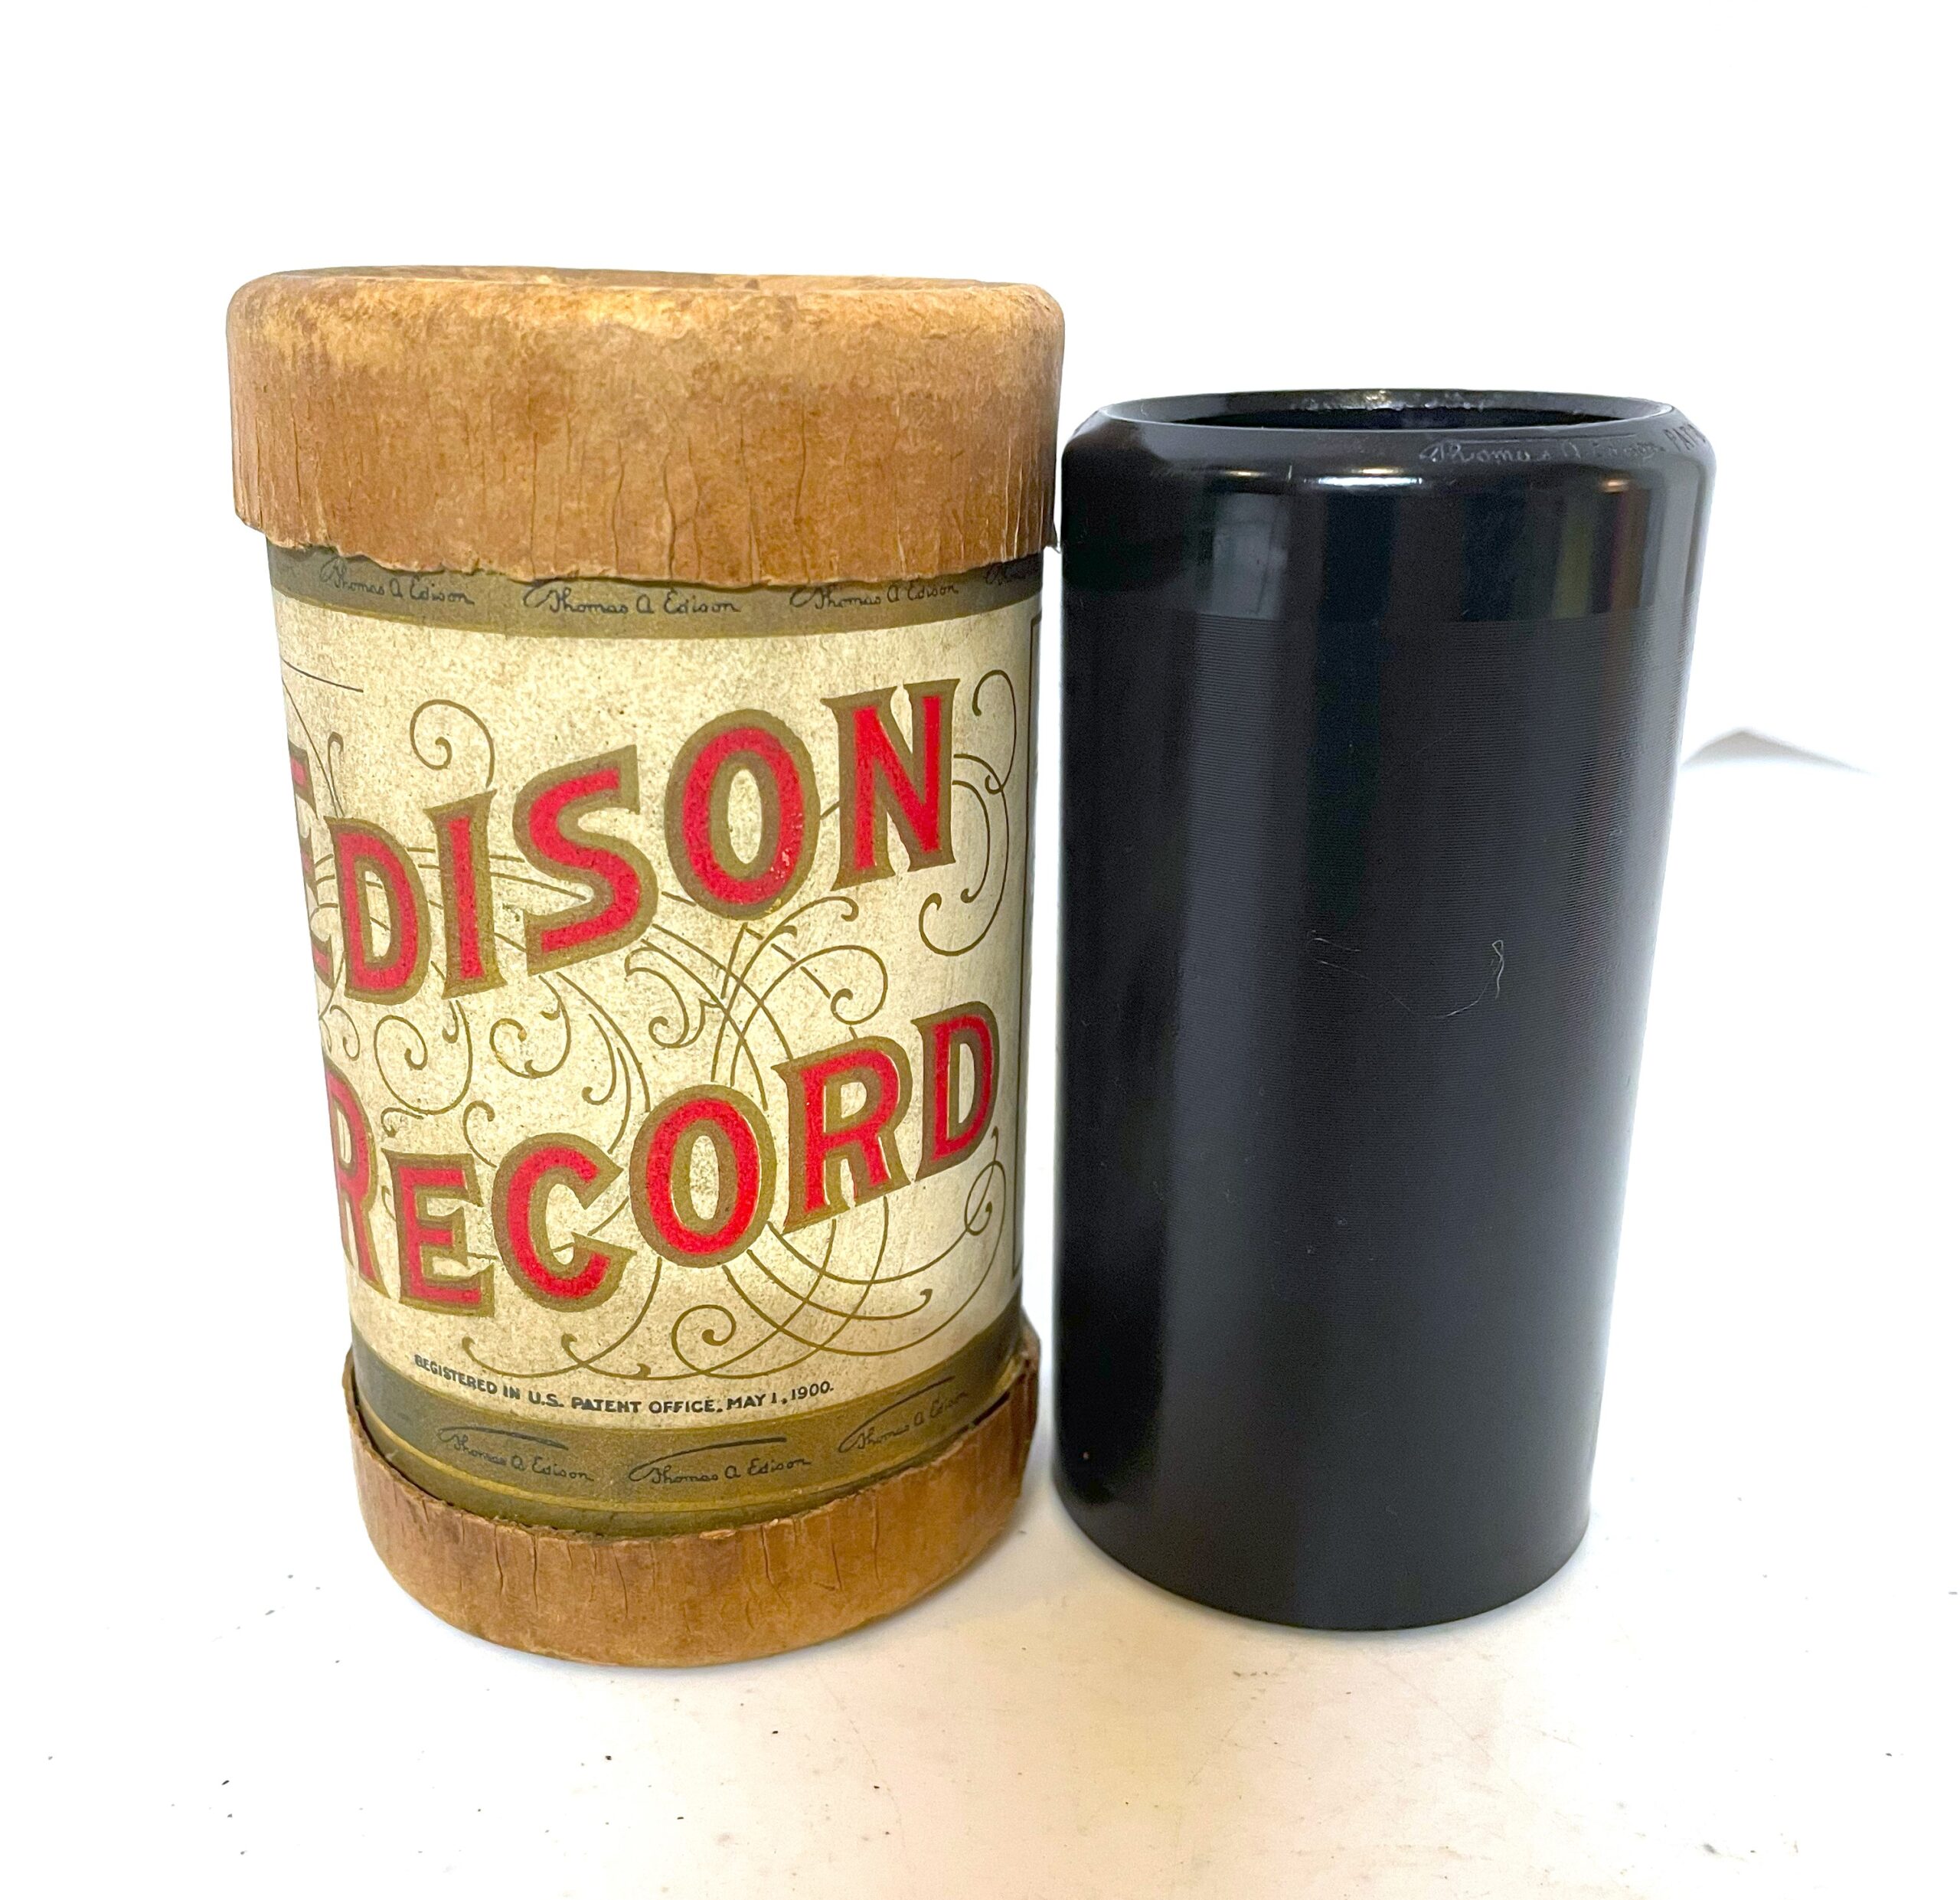 Edison 2-minute Cylinder…” Parody. There Never was a Girl like You“ (Comic)